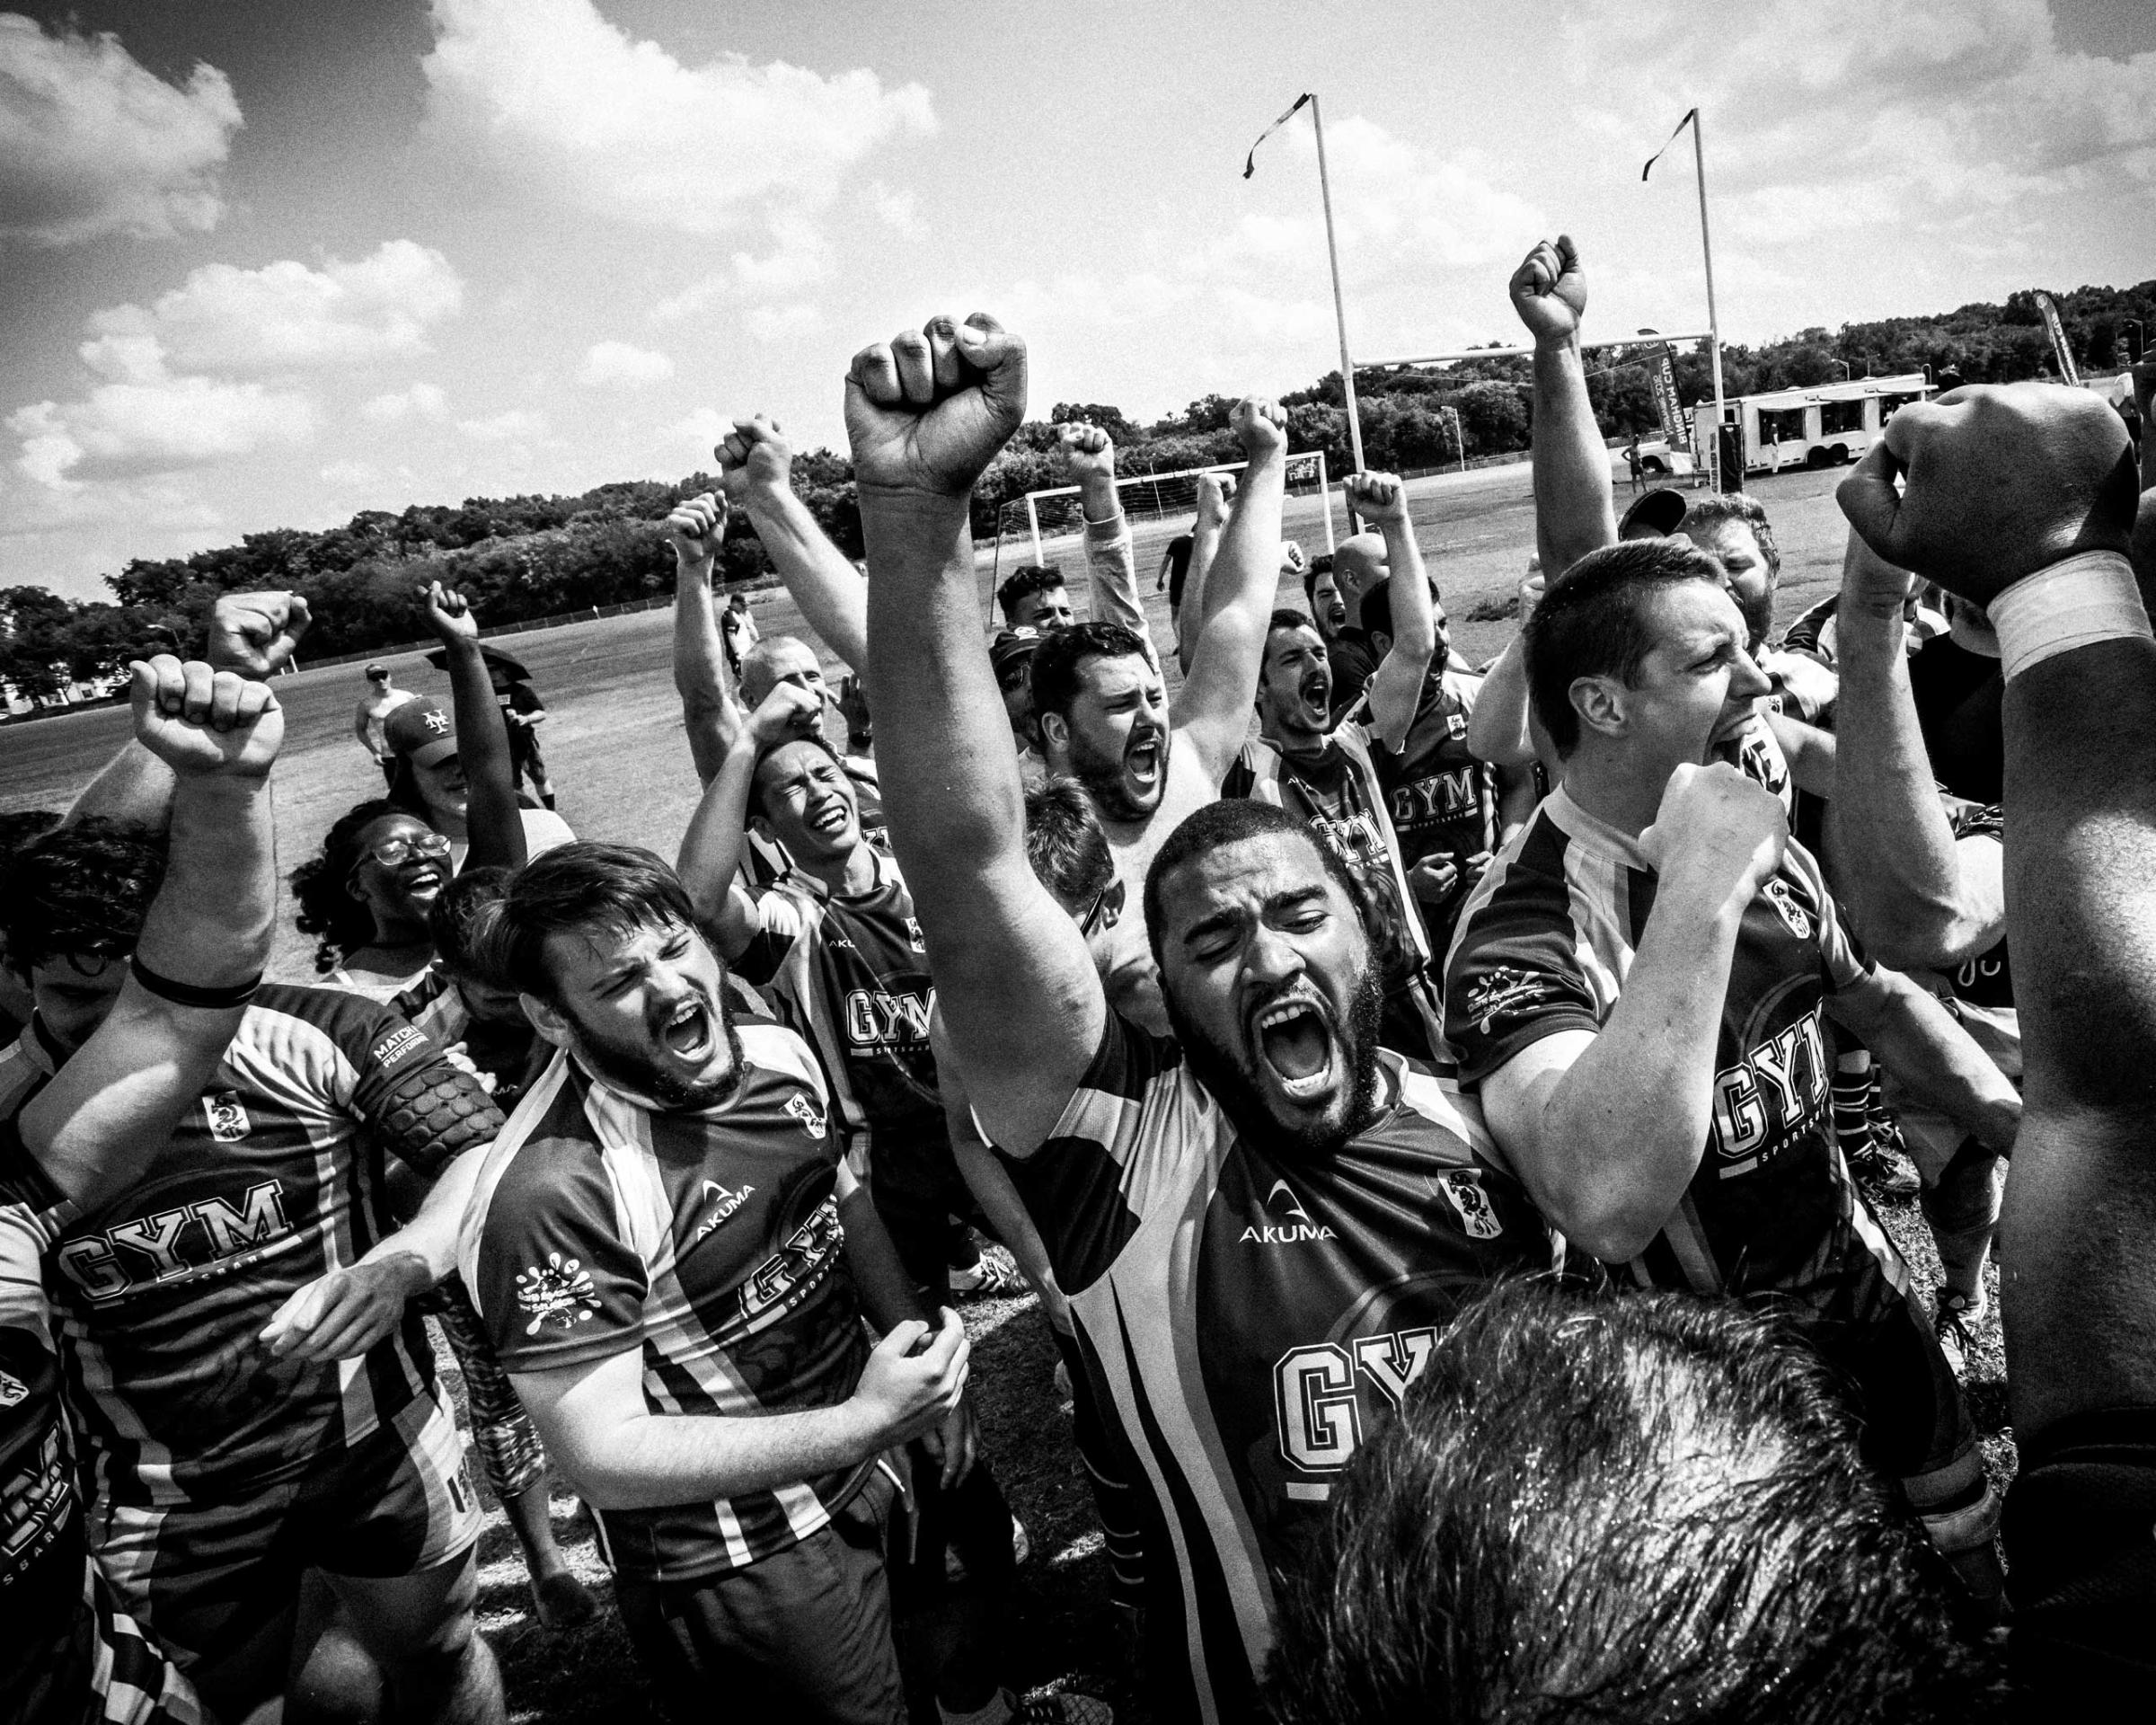 The New York Gotham Knights players celebrate their Bingham Plate win over the London King's Cross Steelers on Sunday May 29, 2016, at the Ted Rhodes Park, in Nashville, Tennessee. New York edged London 14-12. The Gotham Knights were established back in 2001, after September 11, when Mark Bingham, the former gay rugby player after whom the cup is named, and New York Gotham Knights virtual founder, gave his life as a hero on board of the flight United 93. Muddy York Rugby Football Club looks at the Gotham Knights as a true model in terms of players development, growth and inclusiveness.